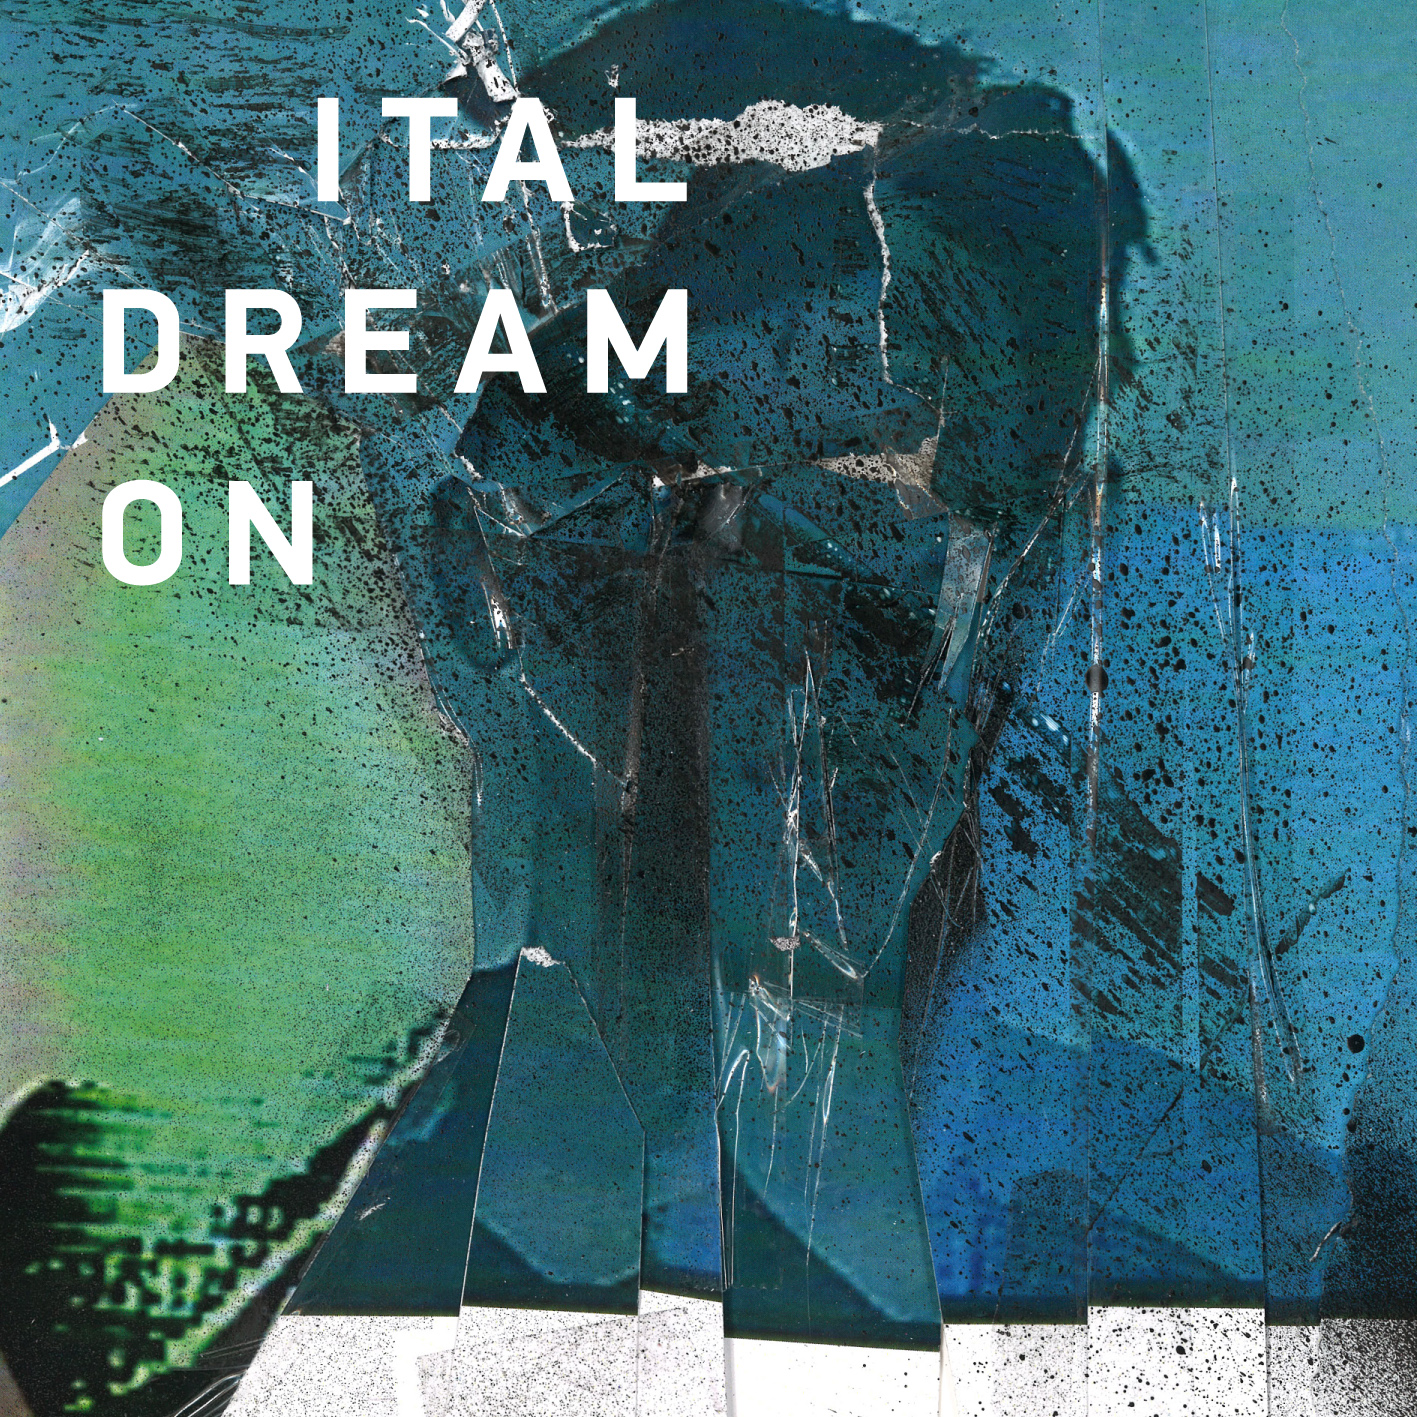 News Added Oct 04, 2012 With his second release for Planet Mu this year, ‘Dream On’ is more of a full-length outing for Ital aka Daniel Martin-McCormick and a much more substantial record than the very popular and widely critically acclaimed ‘Hive Mind’. On ‘Dream On’ Ital takes his experimentation with house and techno forms […]